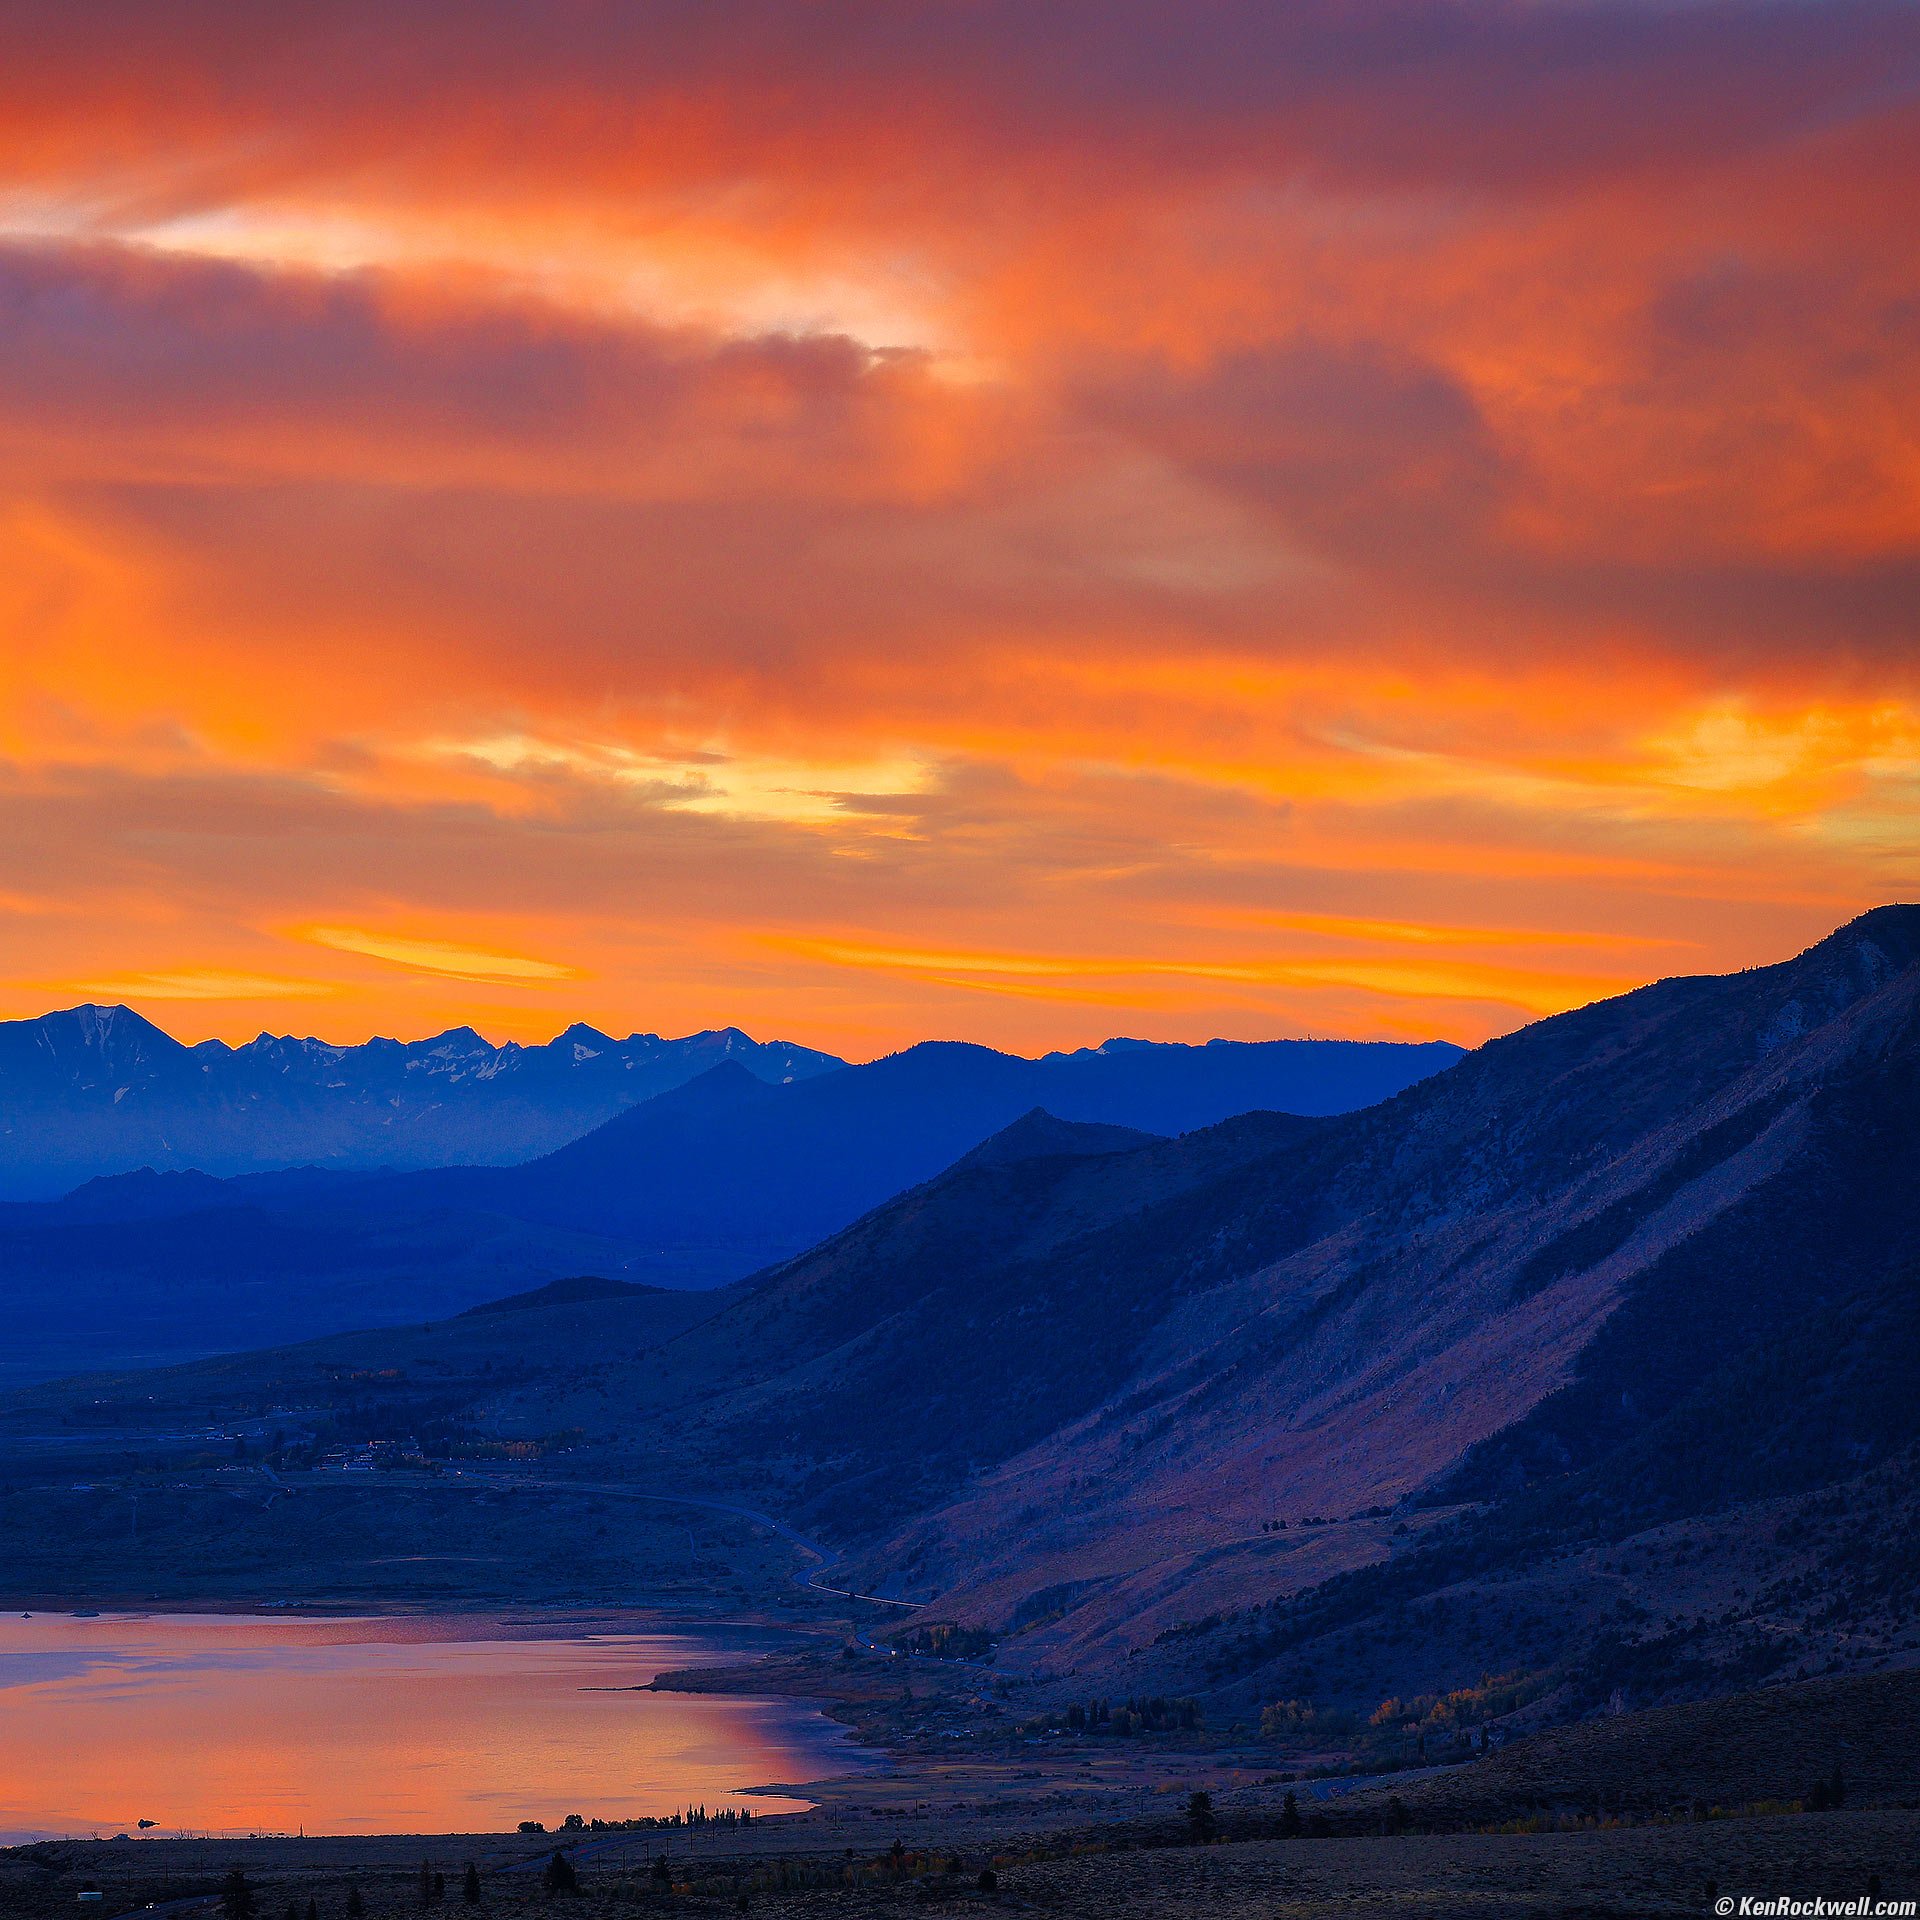 Dawn over Lee Vining and Mono Lake as seen from Conway Summit, California